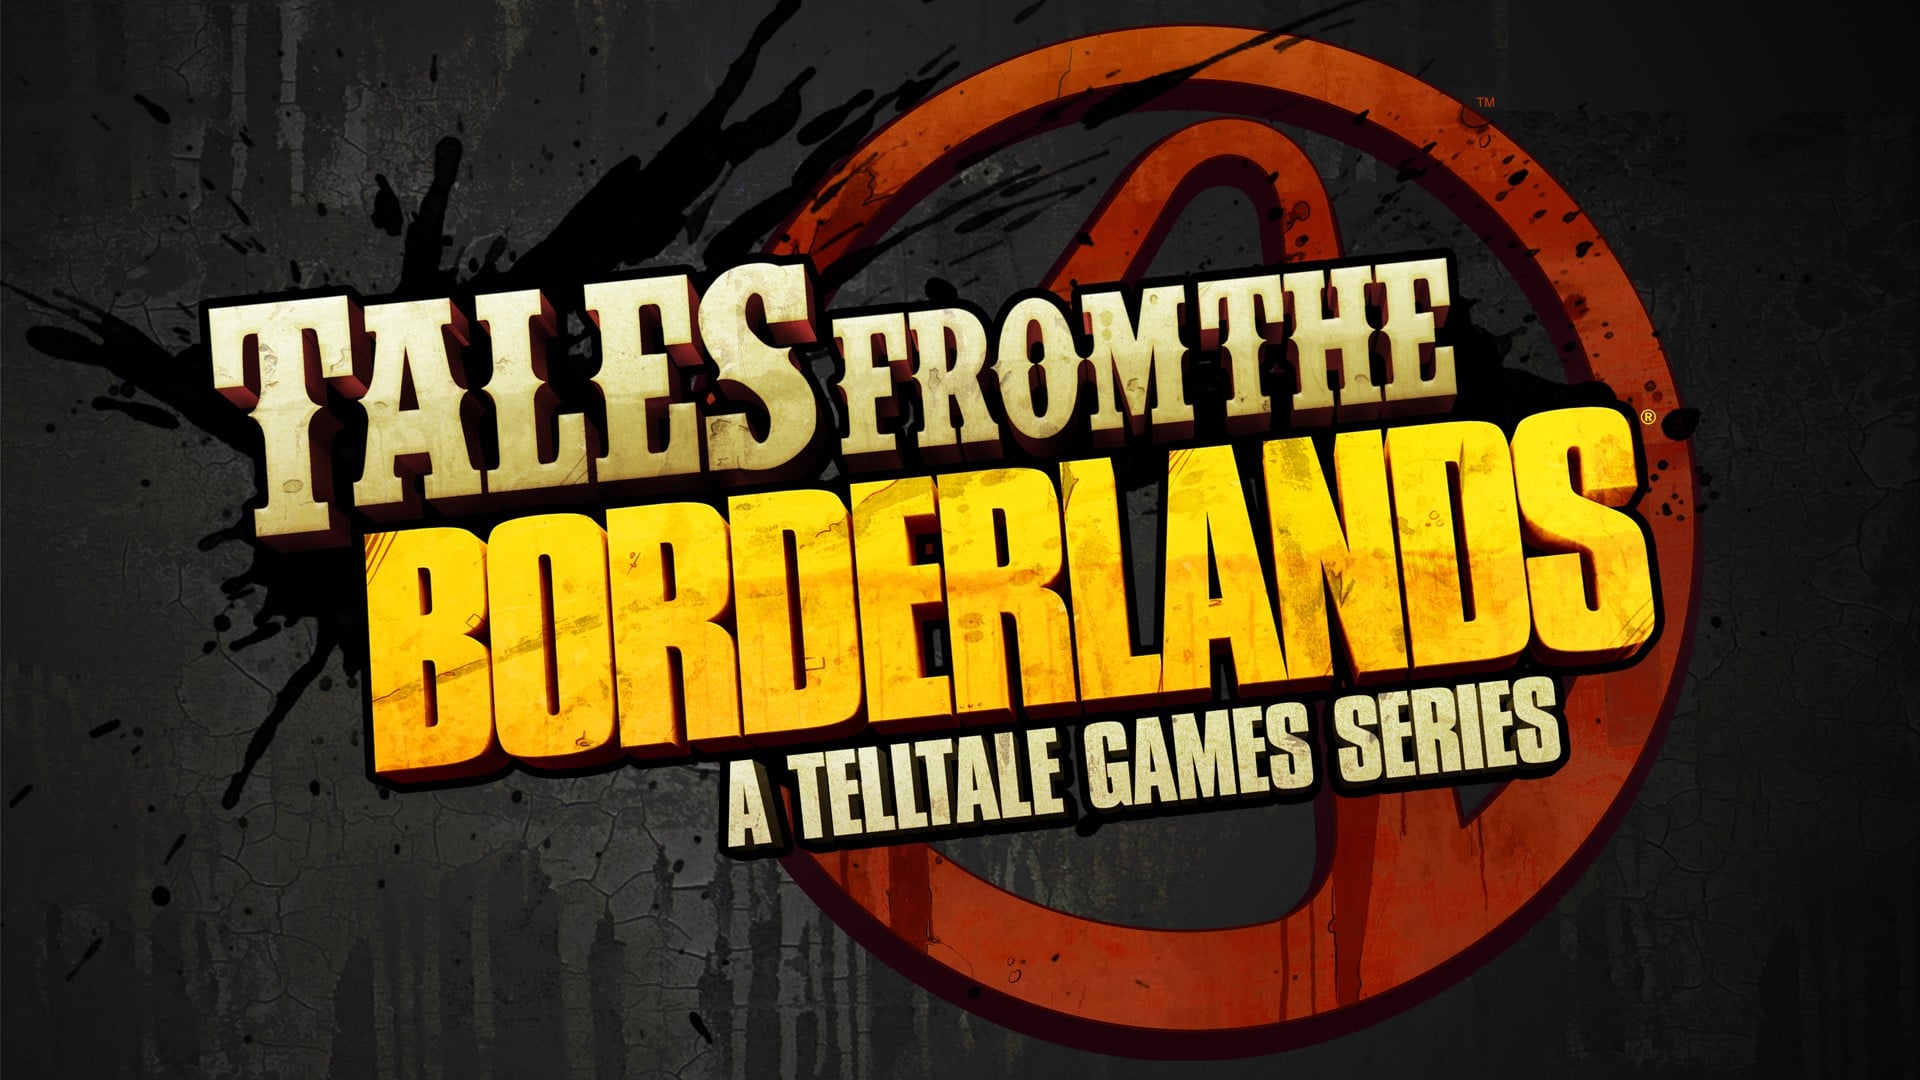 More information about "Tales From The Borderlands Retrospective"